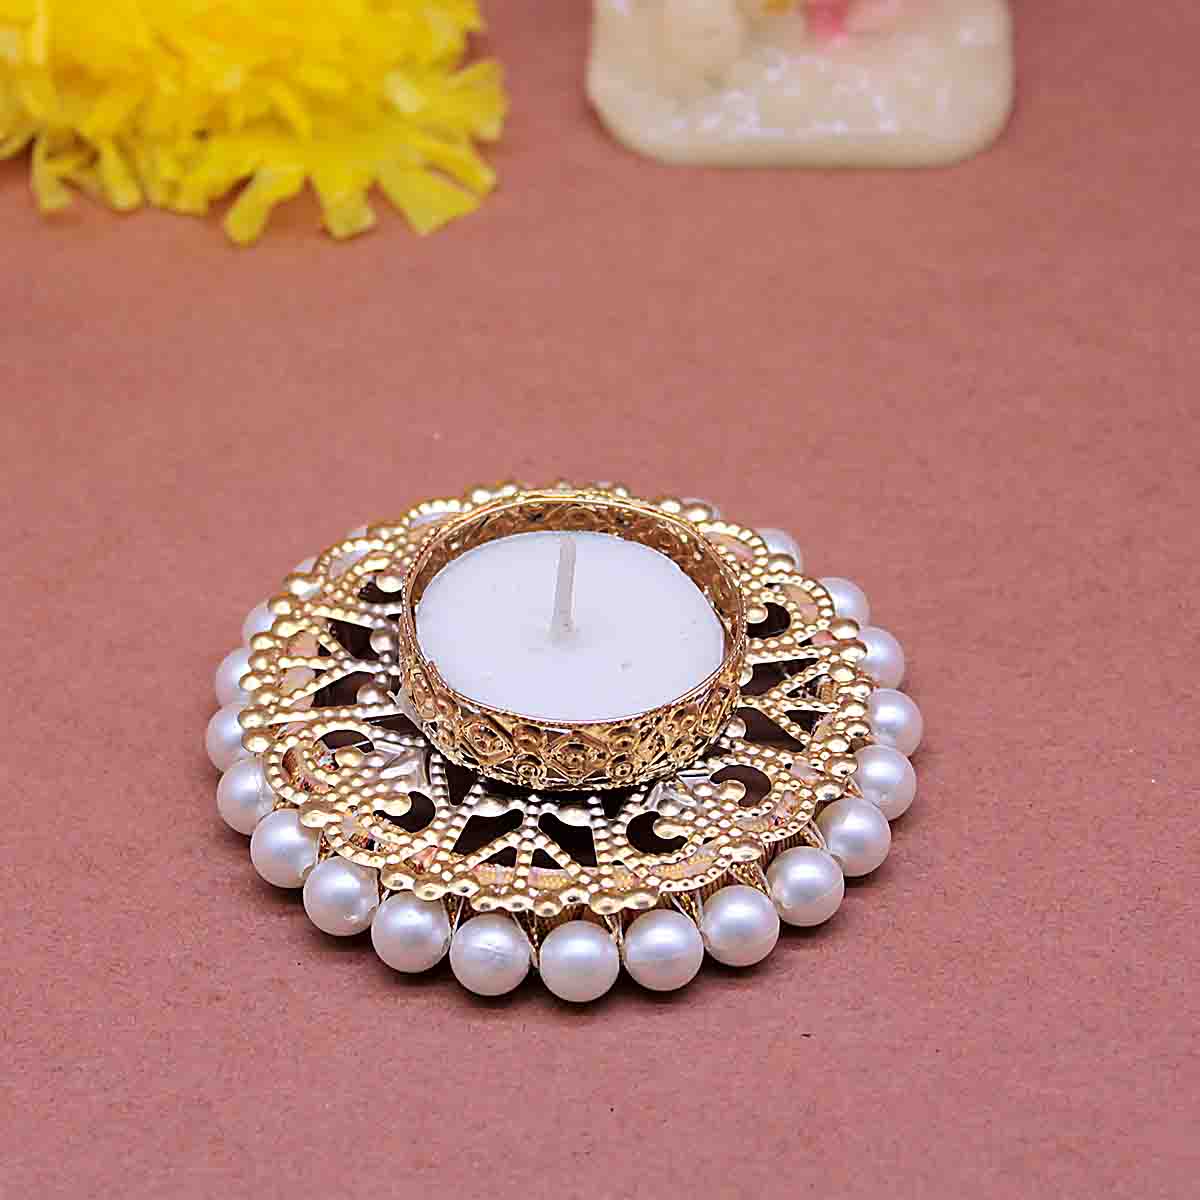 Beads decorated T-light candle holder